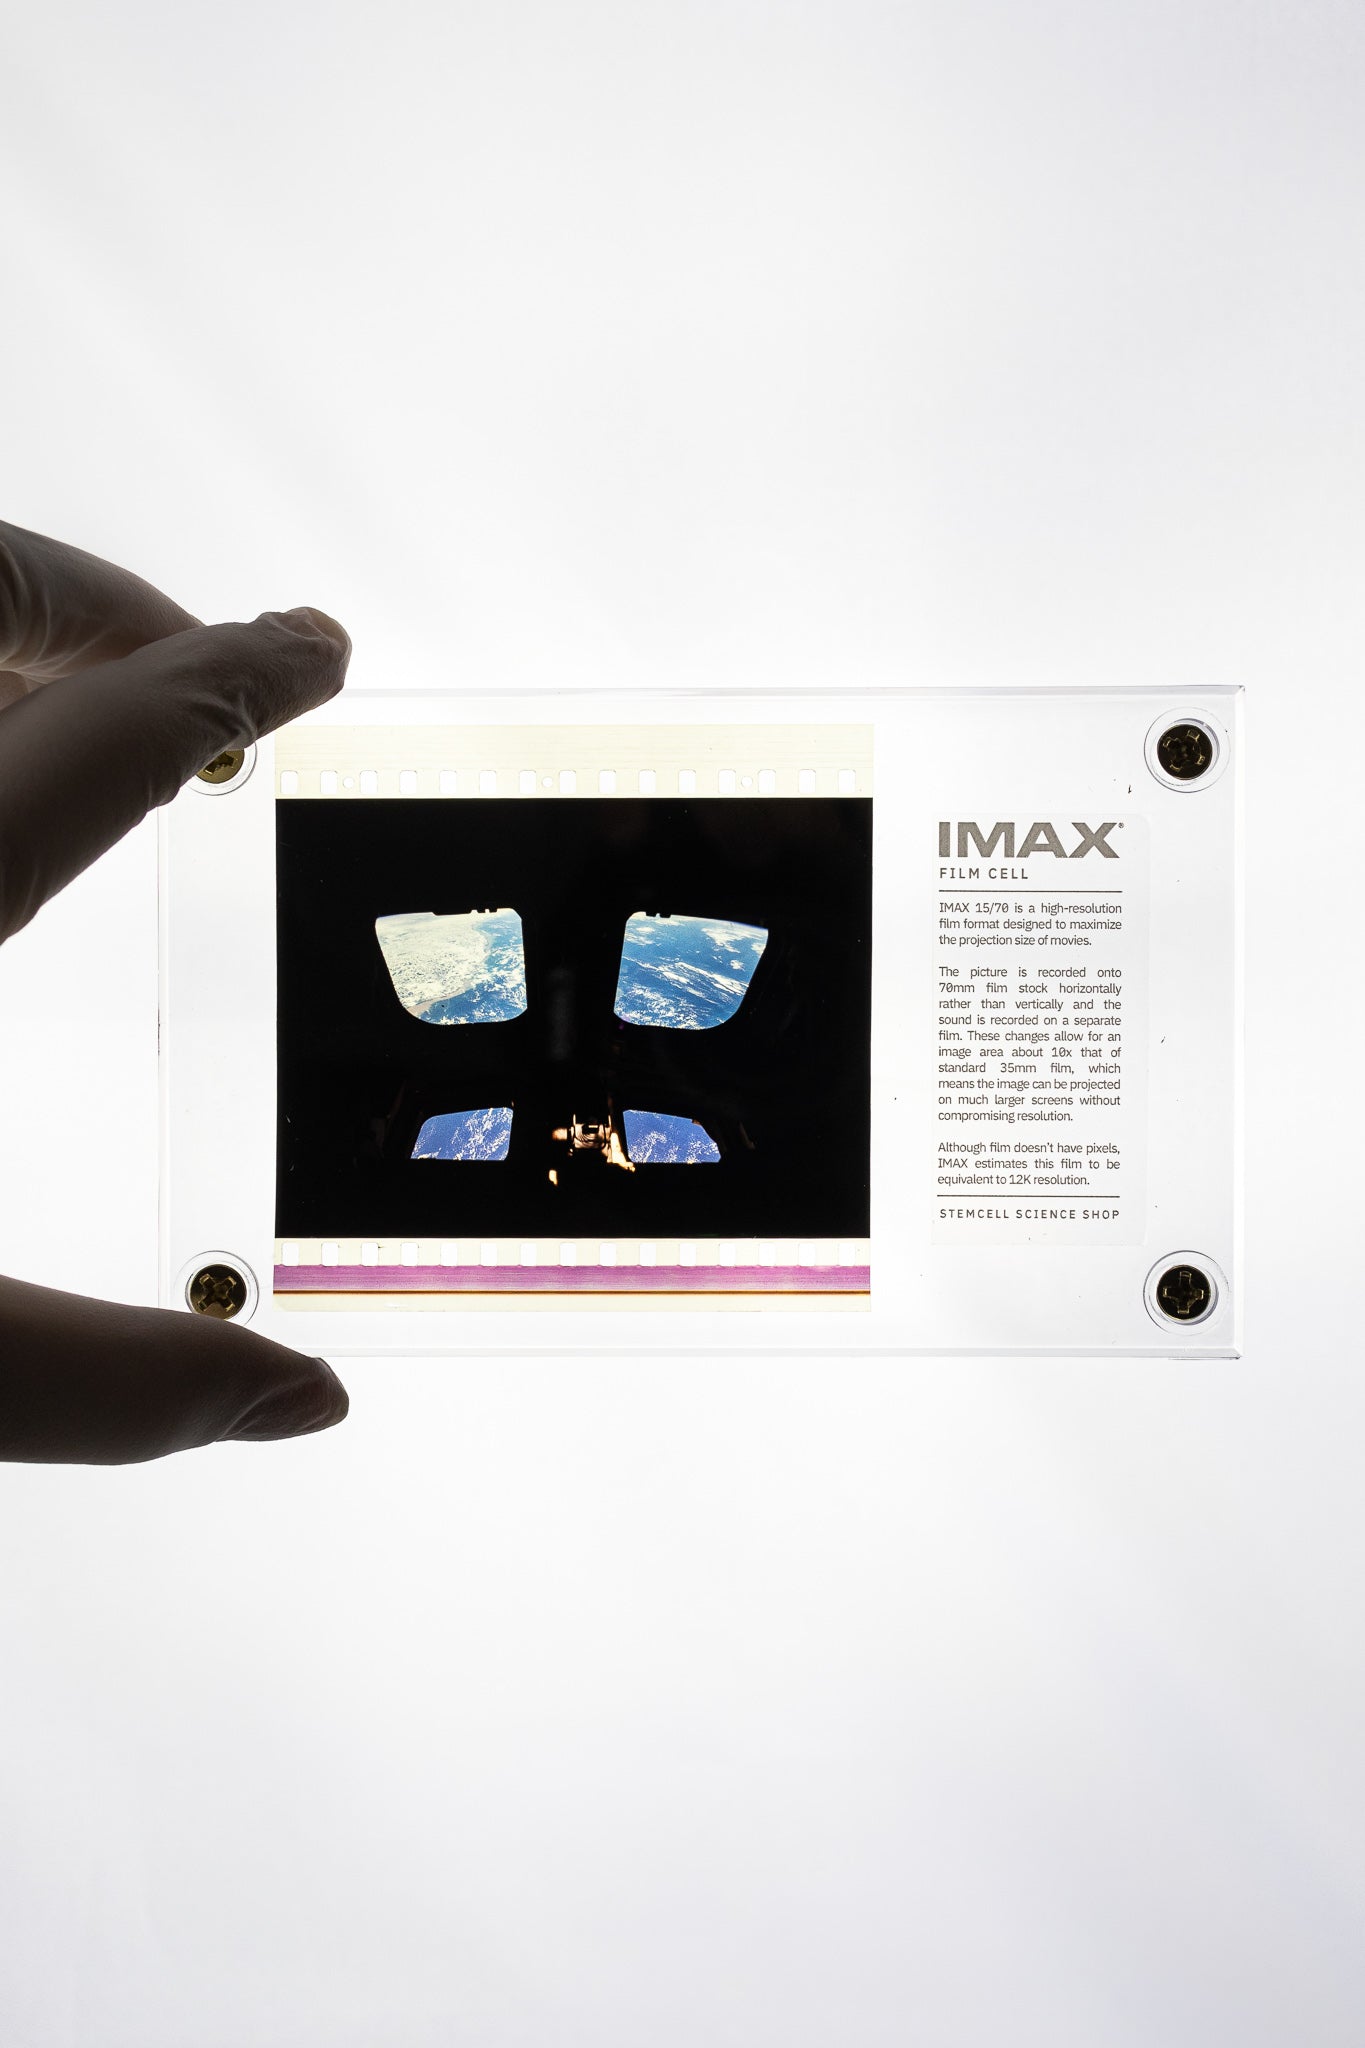 IMAX Film Cell - Stemcell Science Shop